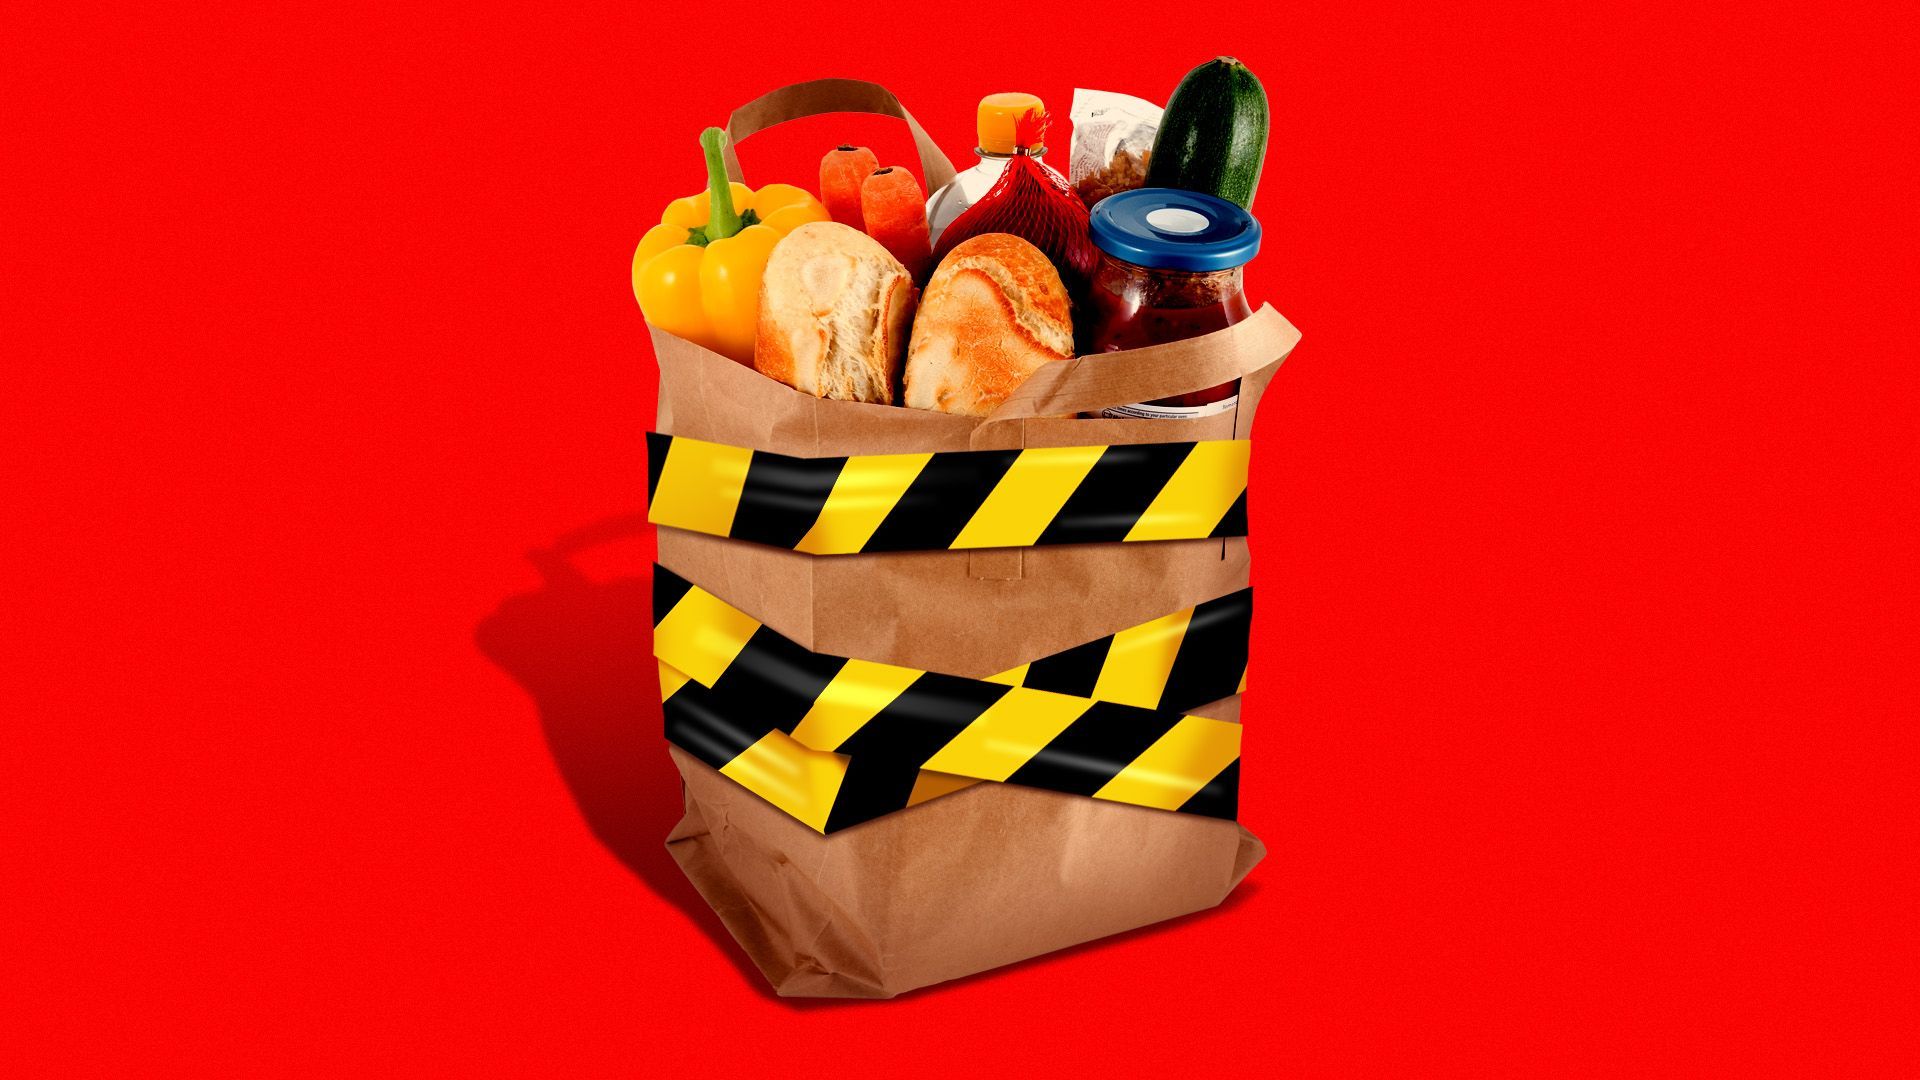 Illustration of a grocery bag covered in caution tape